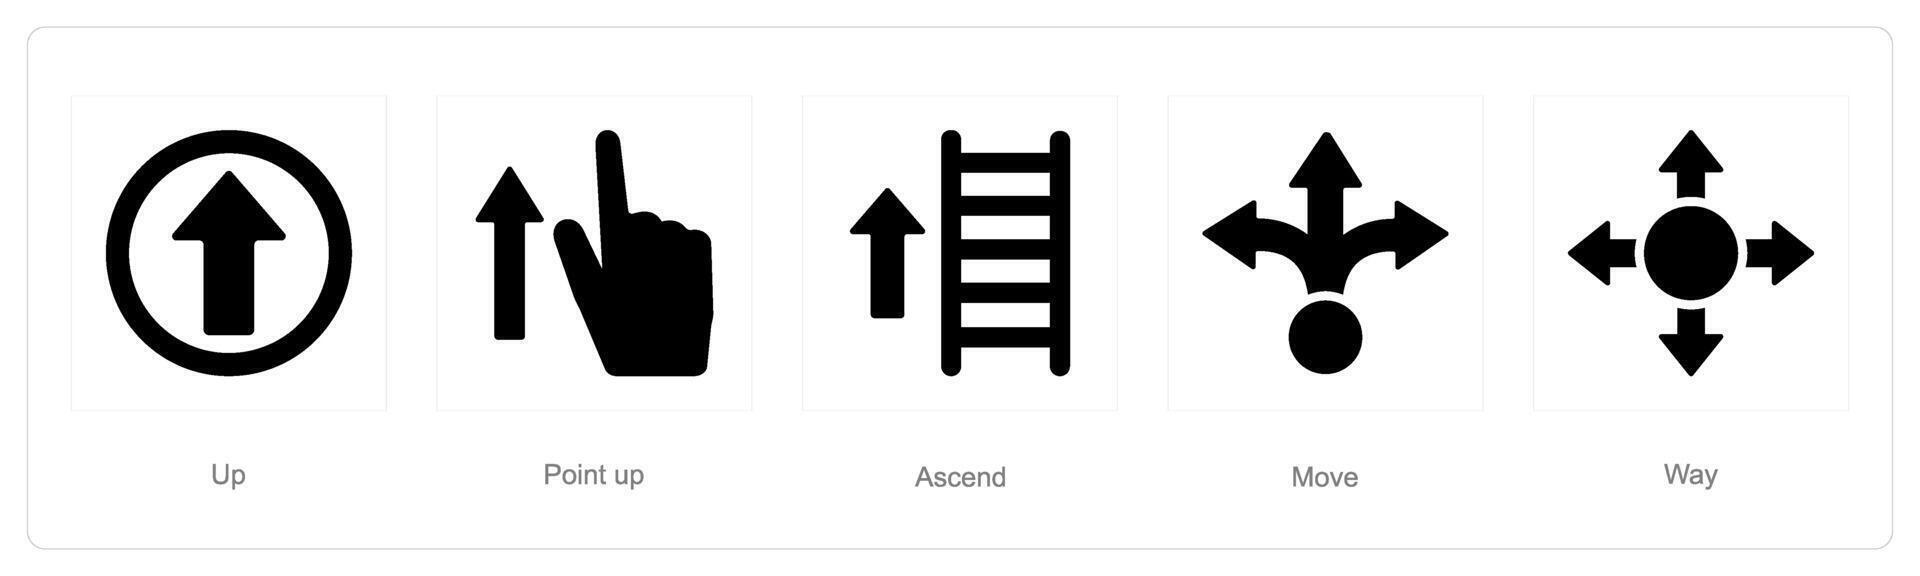 A set of 5 Direction icons as up, point up, ascend vector